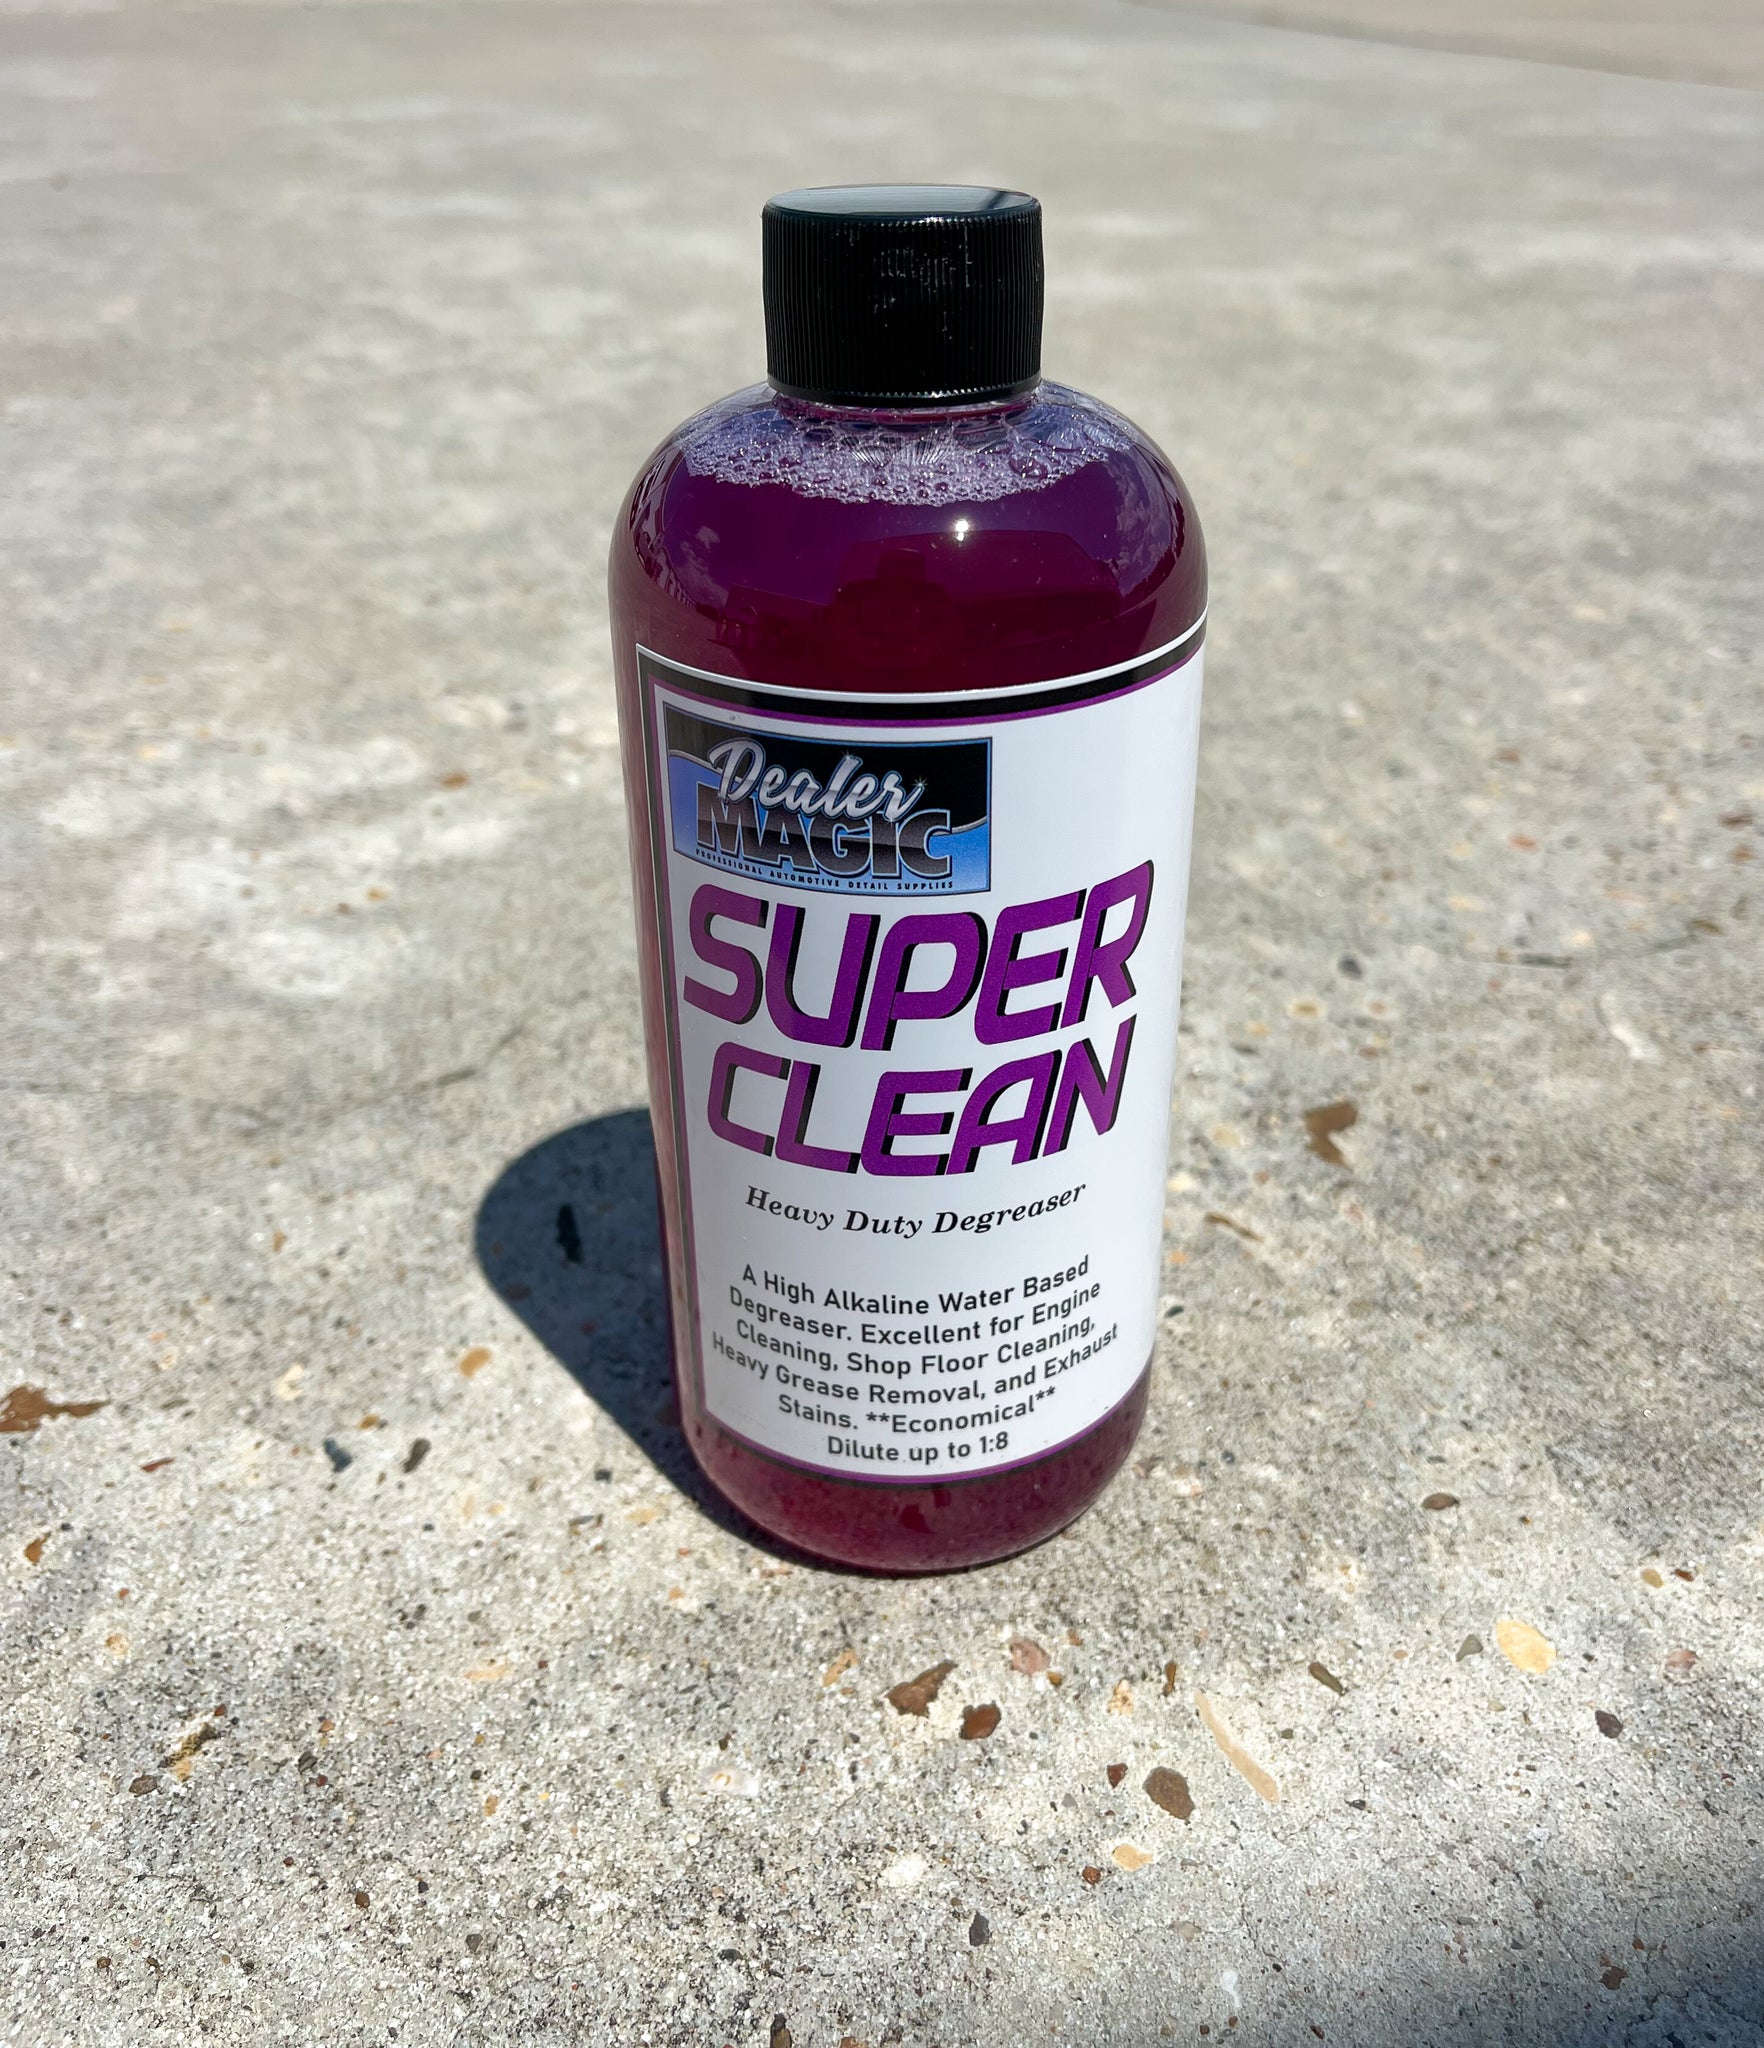 Where Can I Buy SuperClean Cleaner-Degreaser Products?